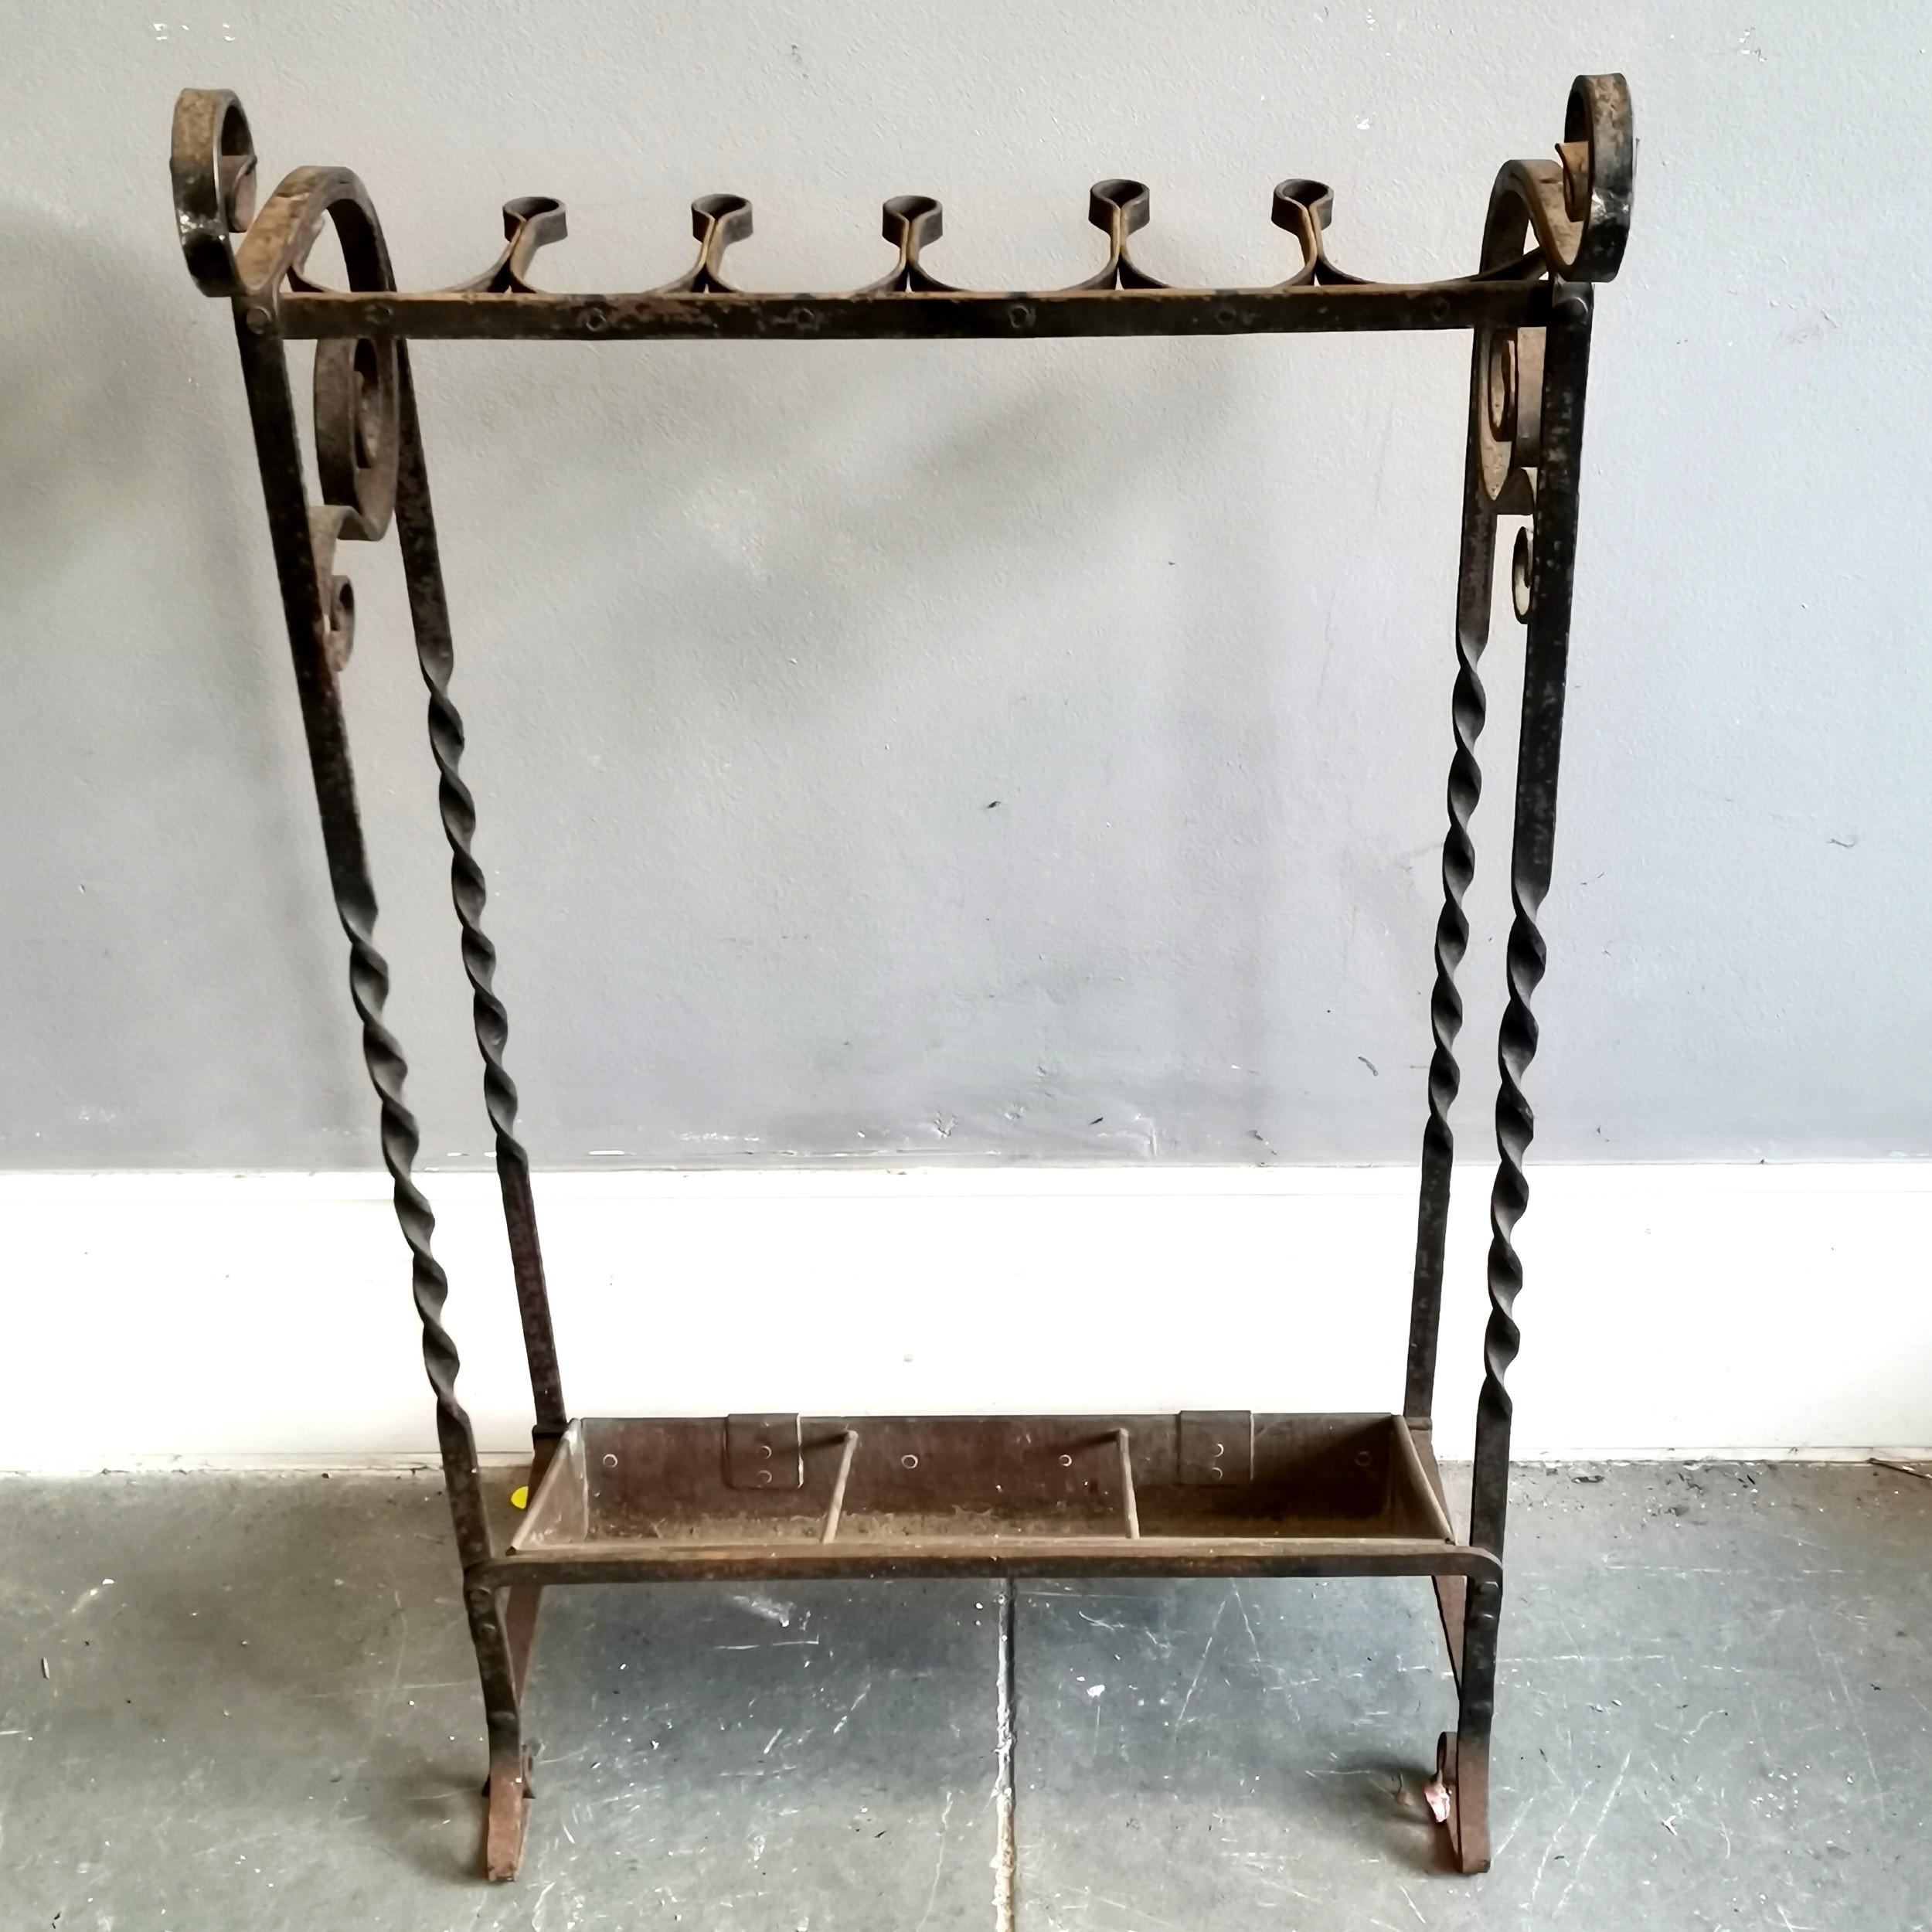 Antique wrought iron stick stand with brass & steel drip tray (Rd 473759) - 83cm high x 44cm wide - Image 2 of 4